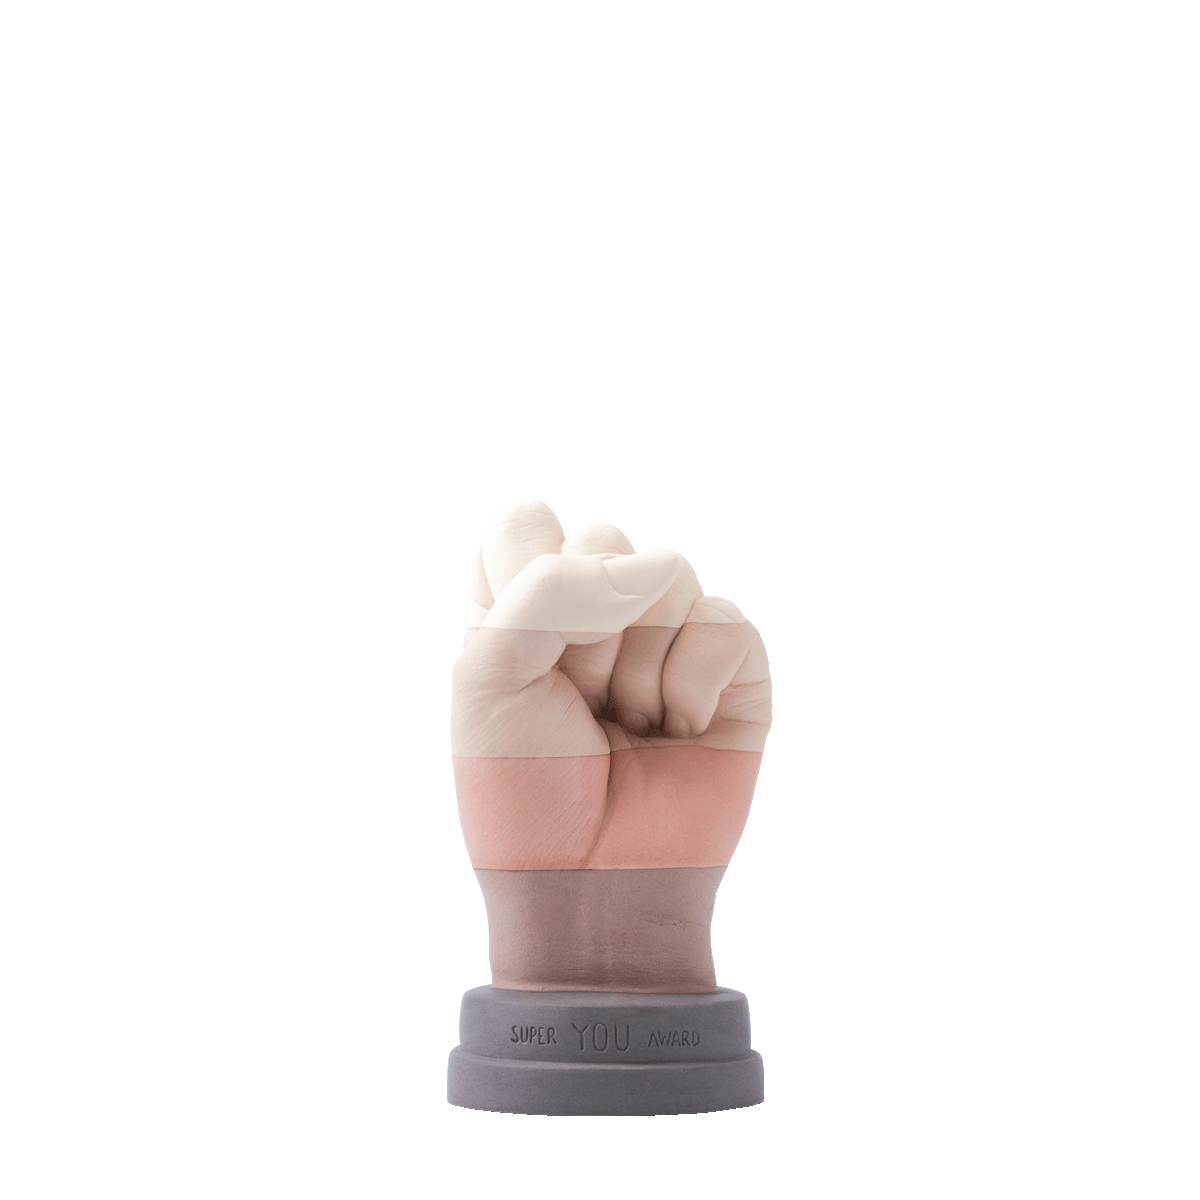 SUPER-YOU-AWARD-empowering-peaceful-inspiring-all-skin-colours-UNITED-raised-fist-sculpture